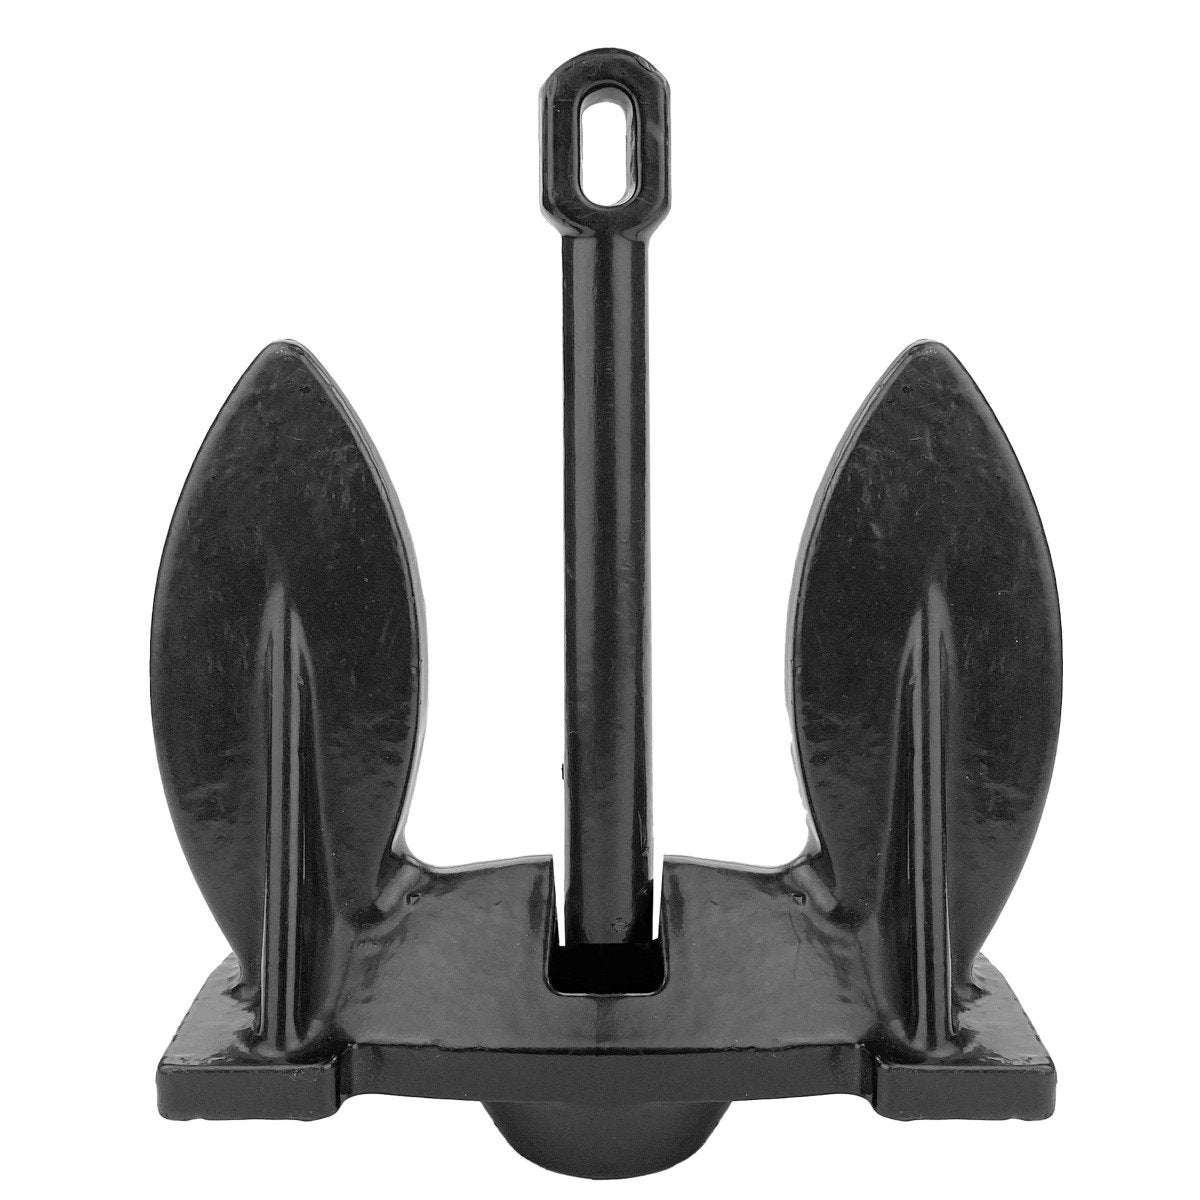 Boating Essentials - 10 LB Coated Navy Anchor - BE-AN-50222-DP